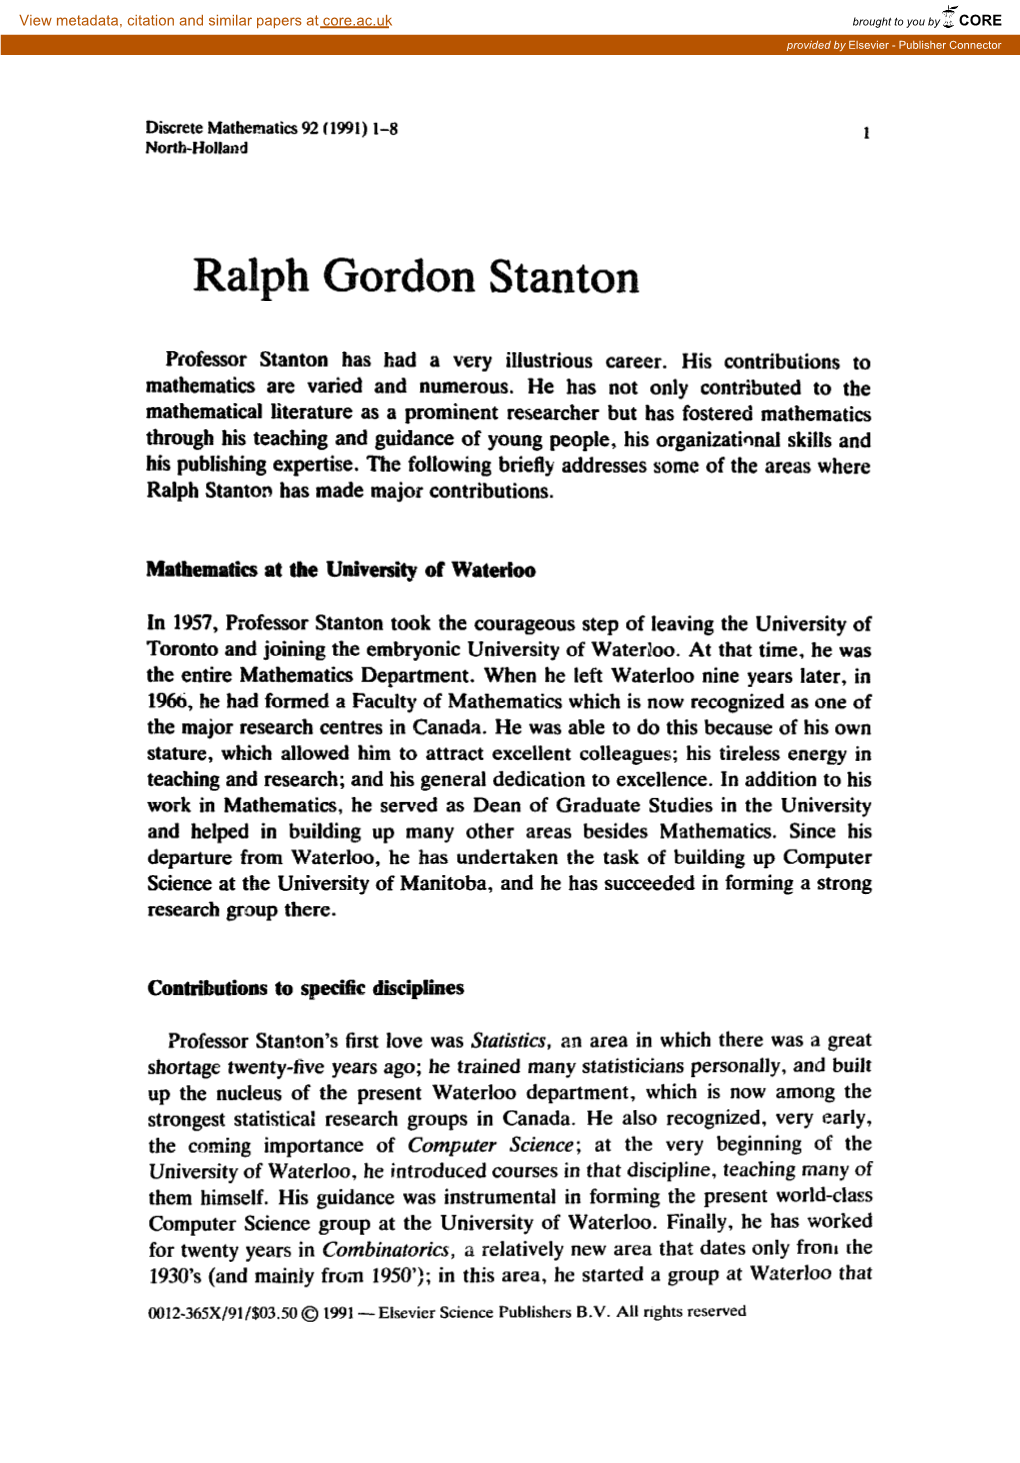 Professor Stanton Has Had a Very Illustrious Career. His Contributions to Mathematics Are Varied and Numerous